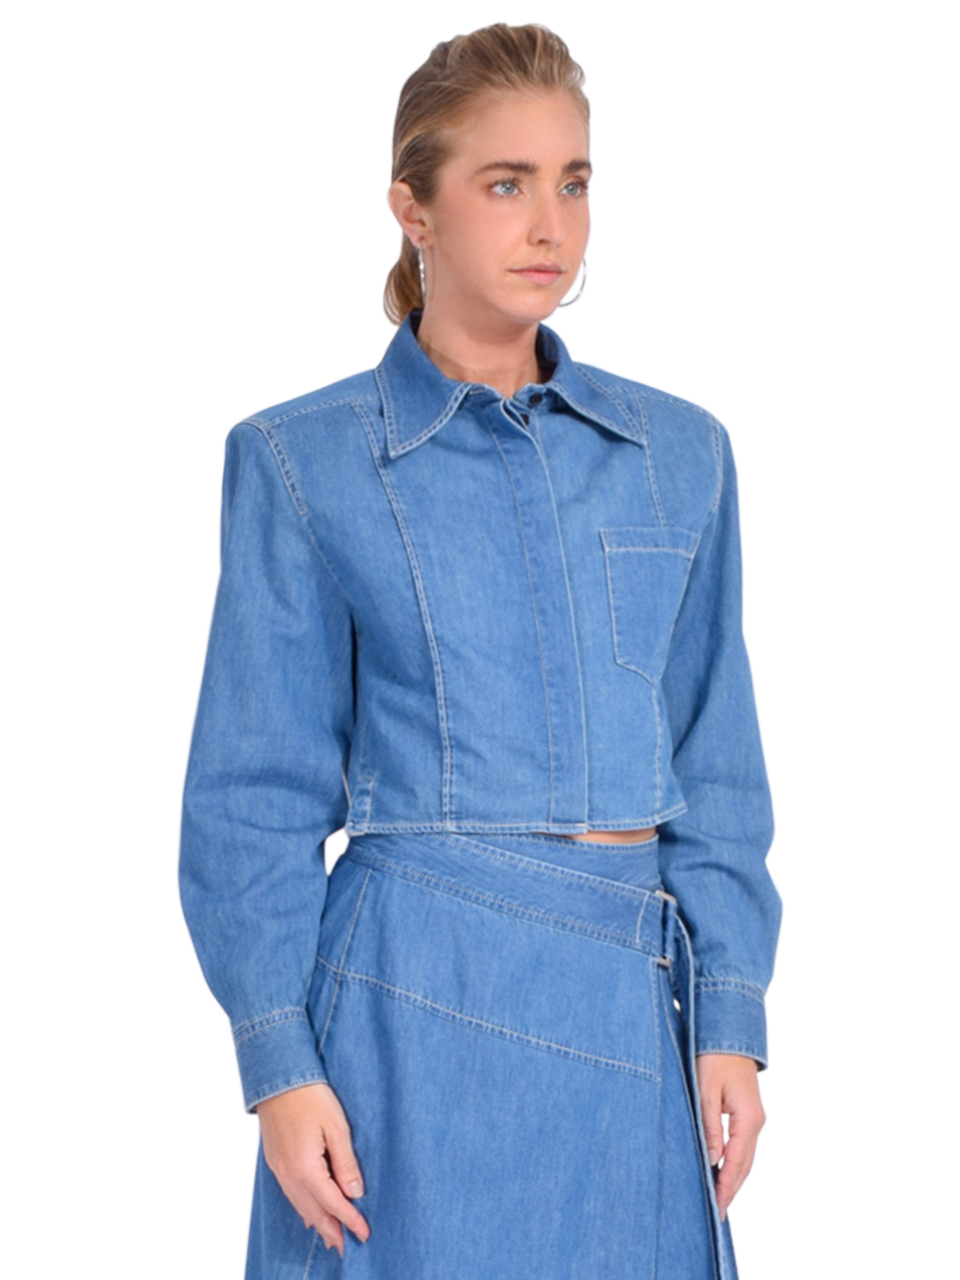 3.1 Phillip Lim Chambray Cropped Shirt with Shoulder Pads in Indigo Side View 